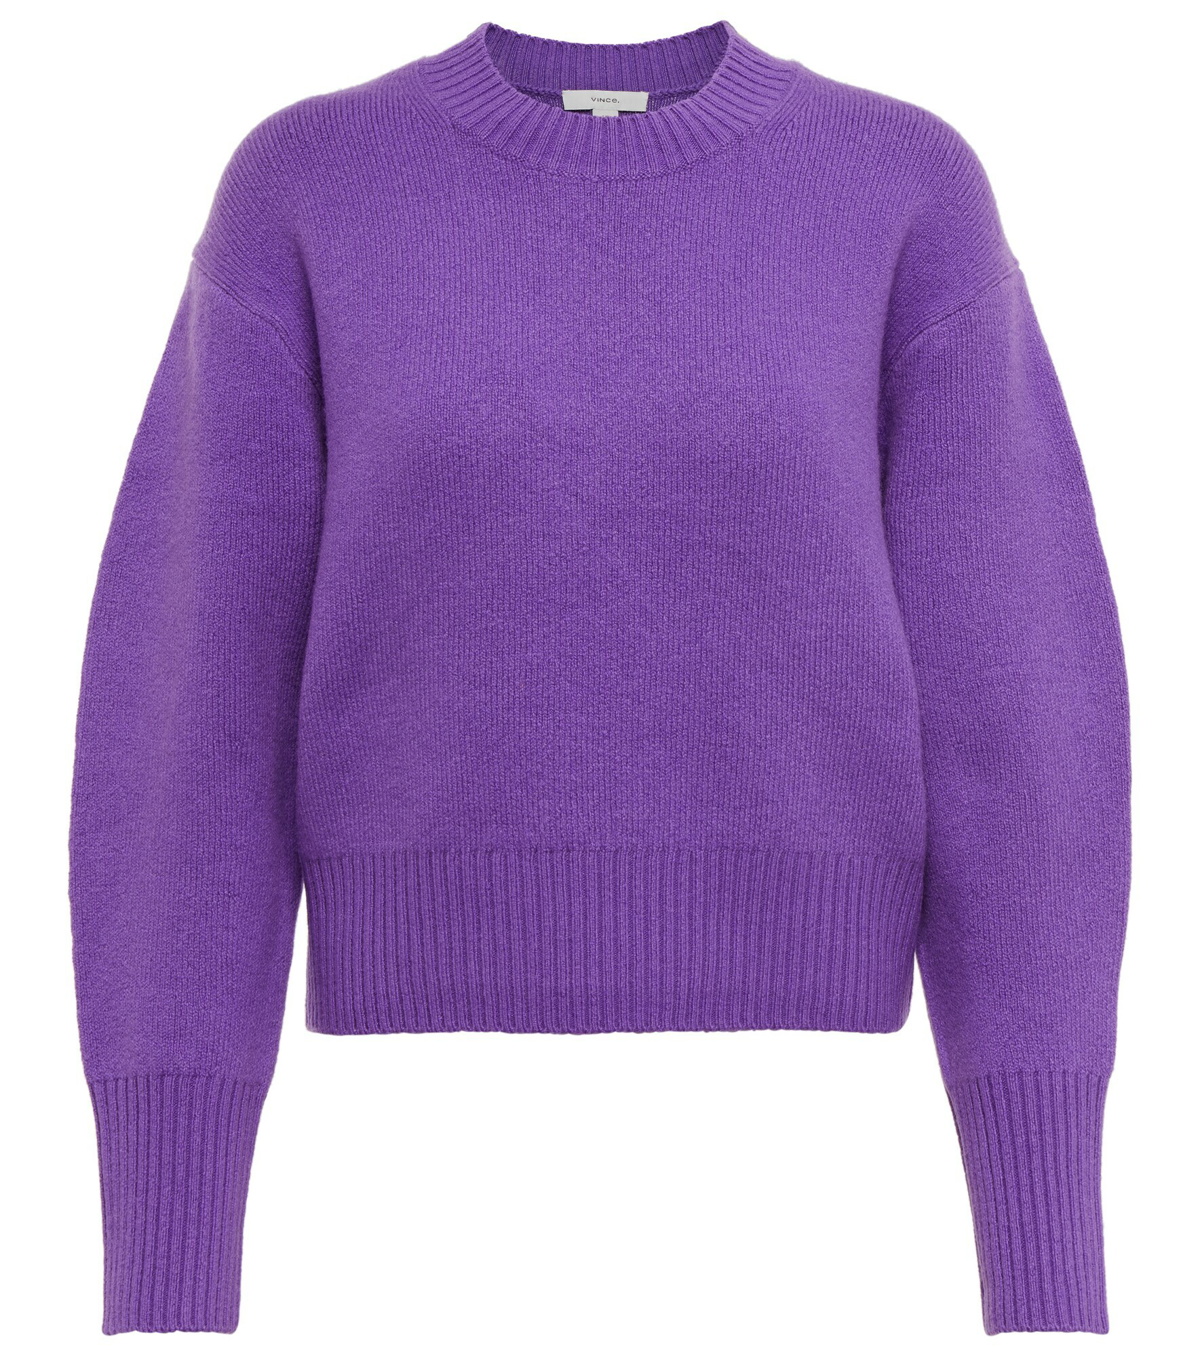 Vince - Wool and cashmere-blend sweater Vince